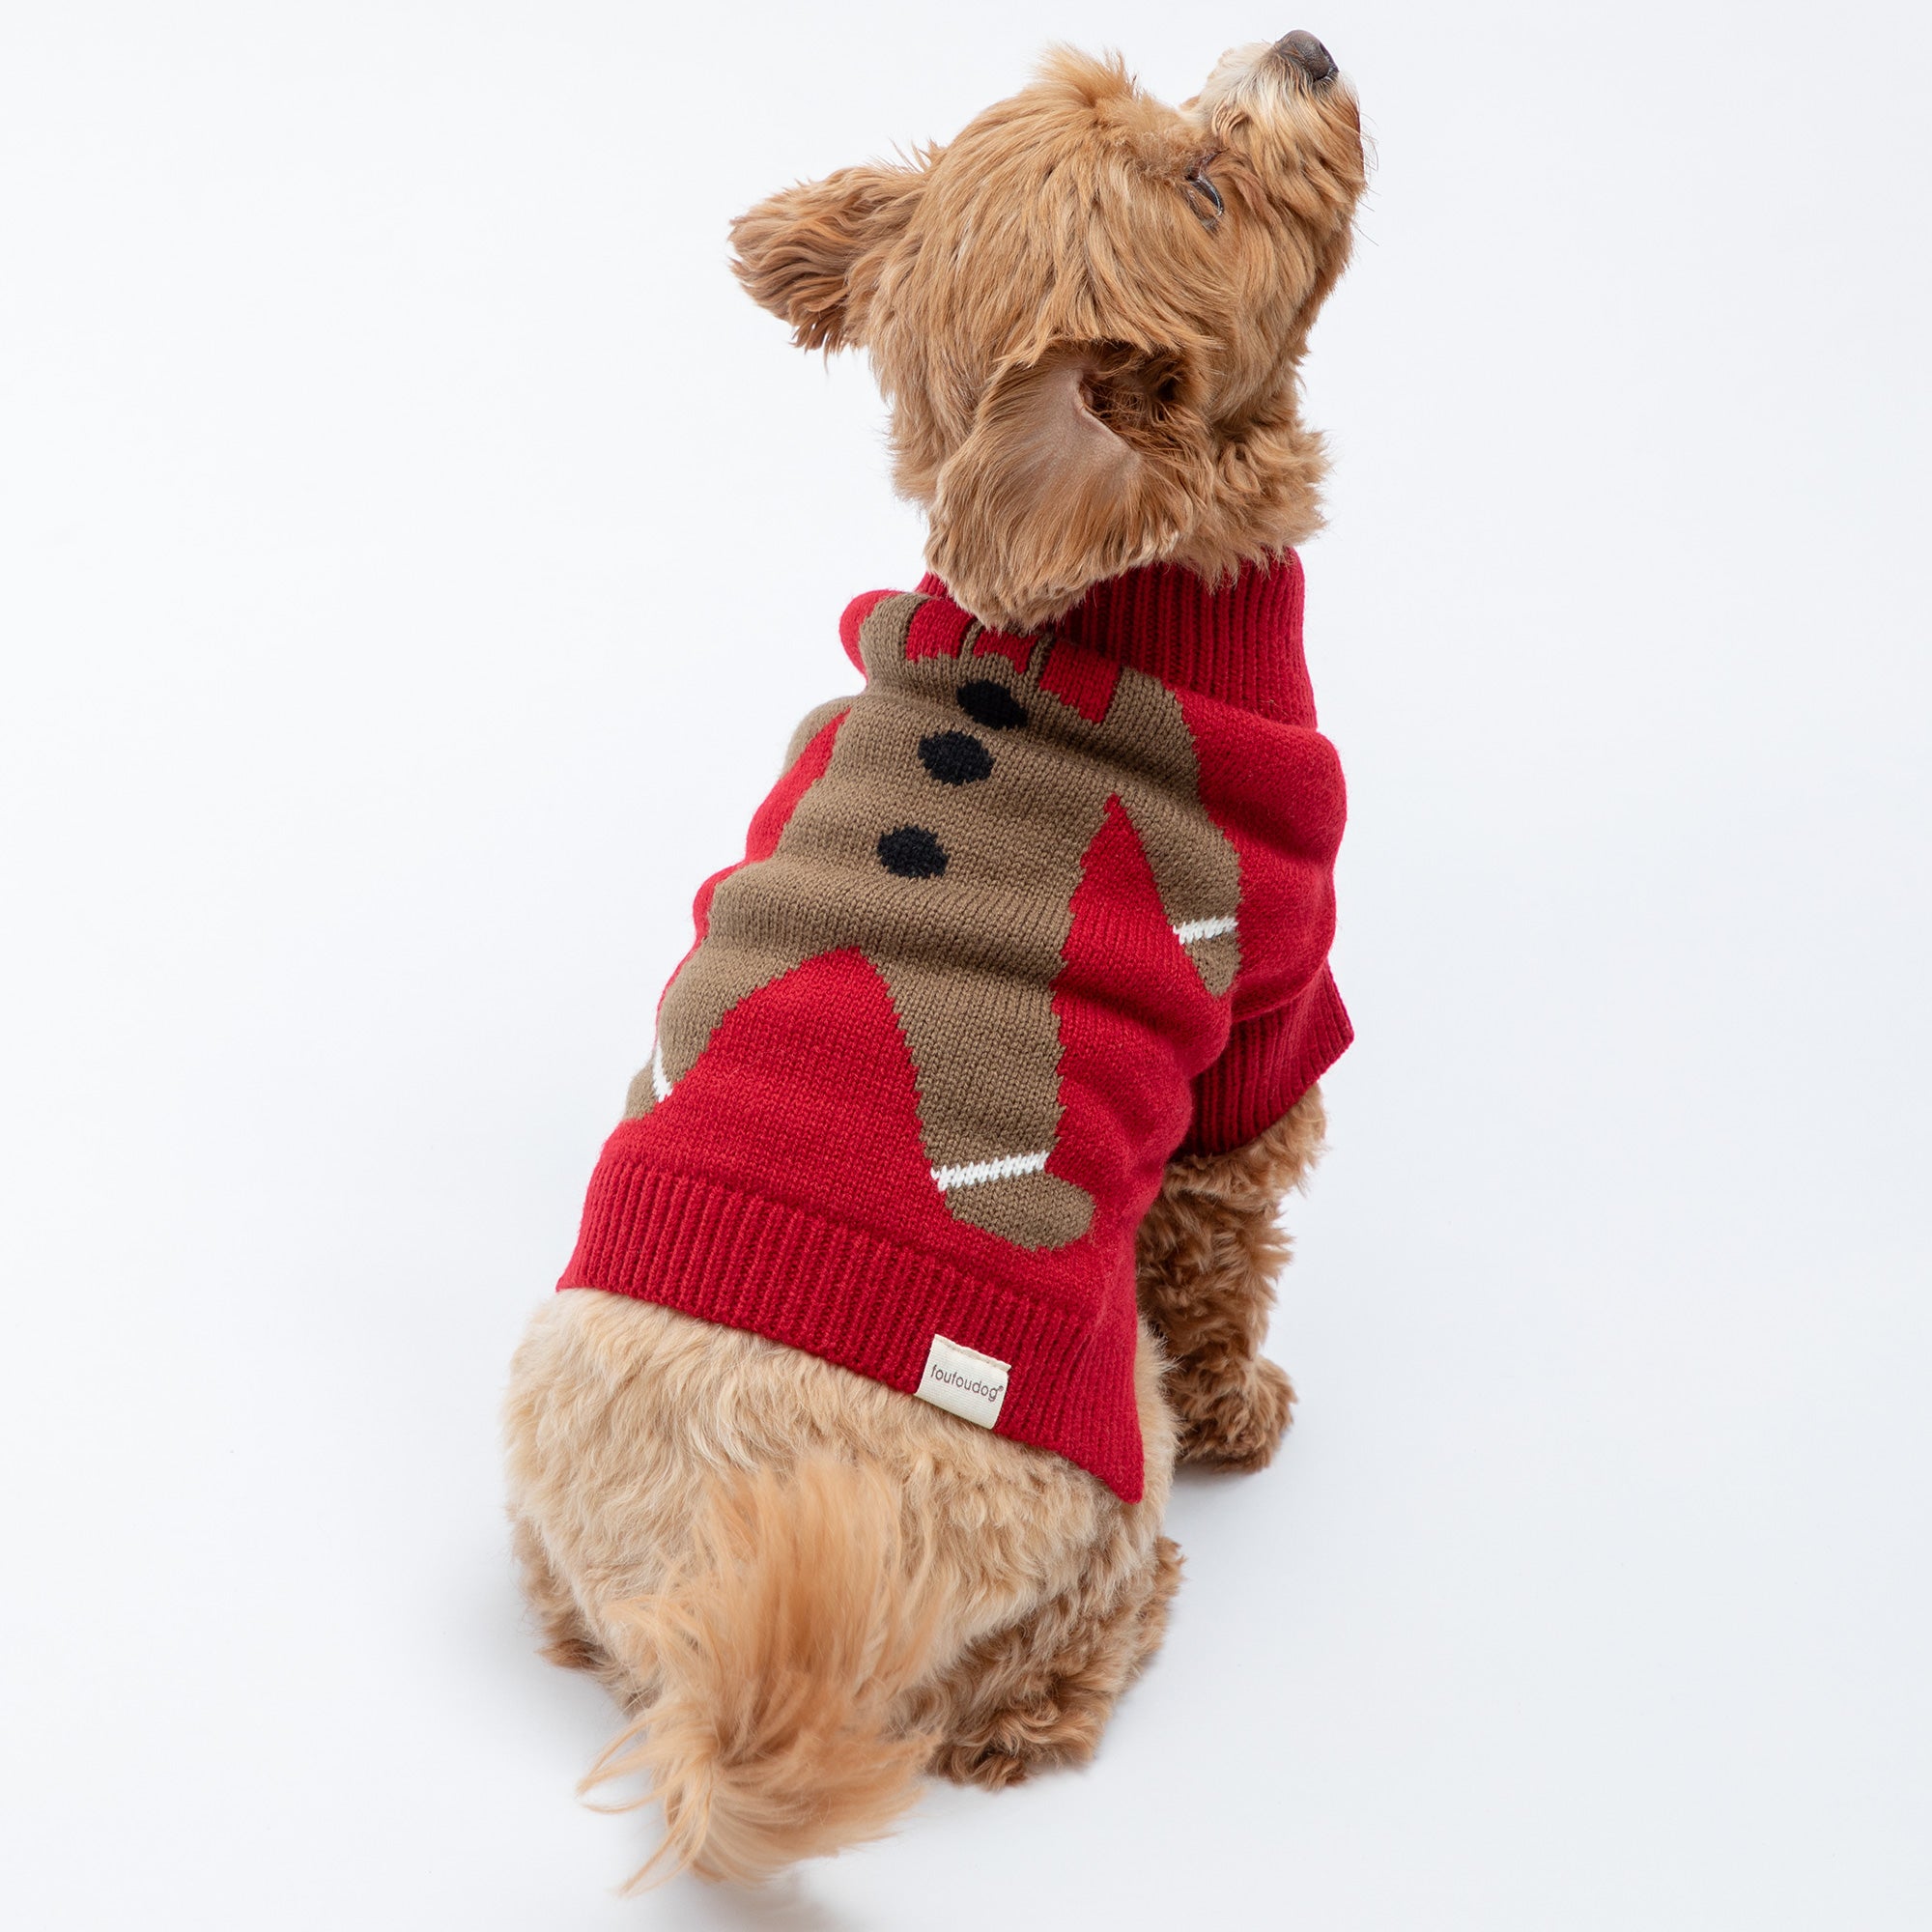 Cozy Christmas Pet Sweater - Gingerbread - M